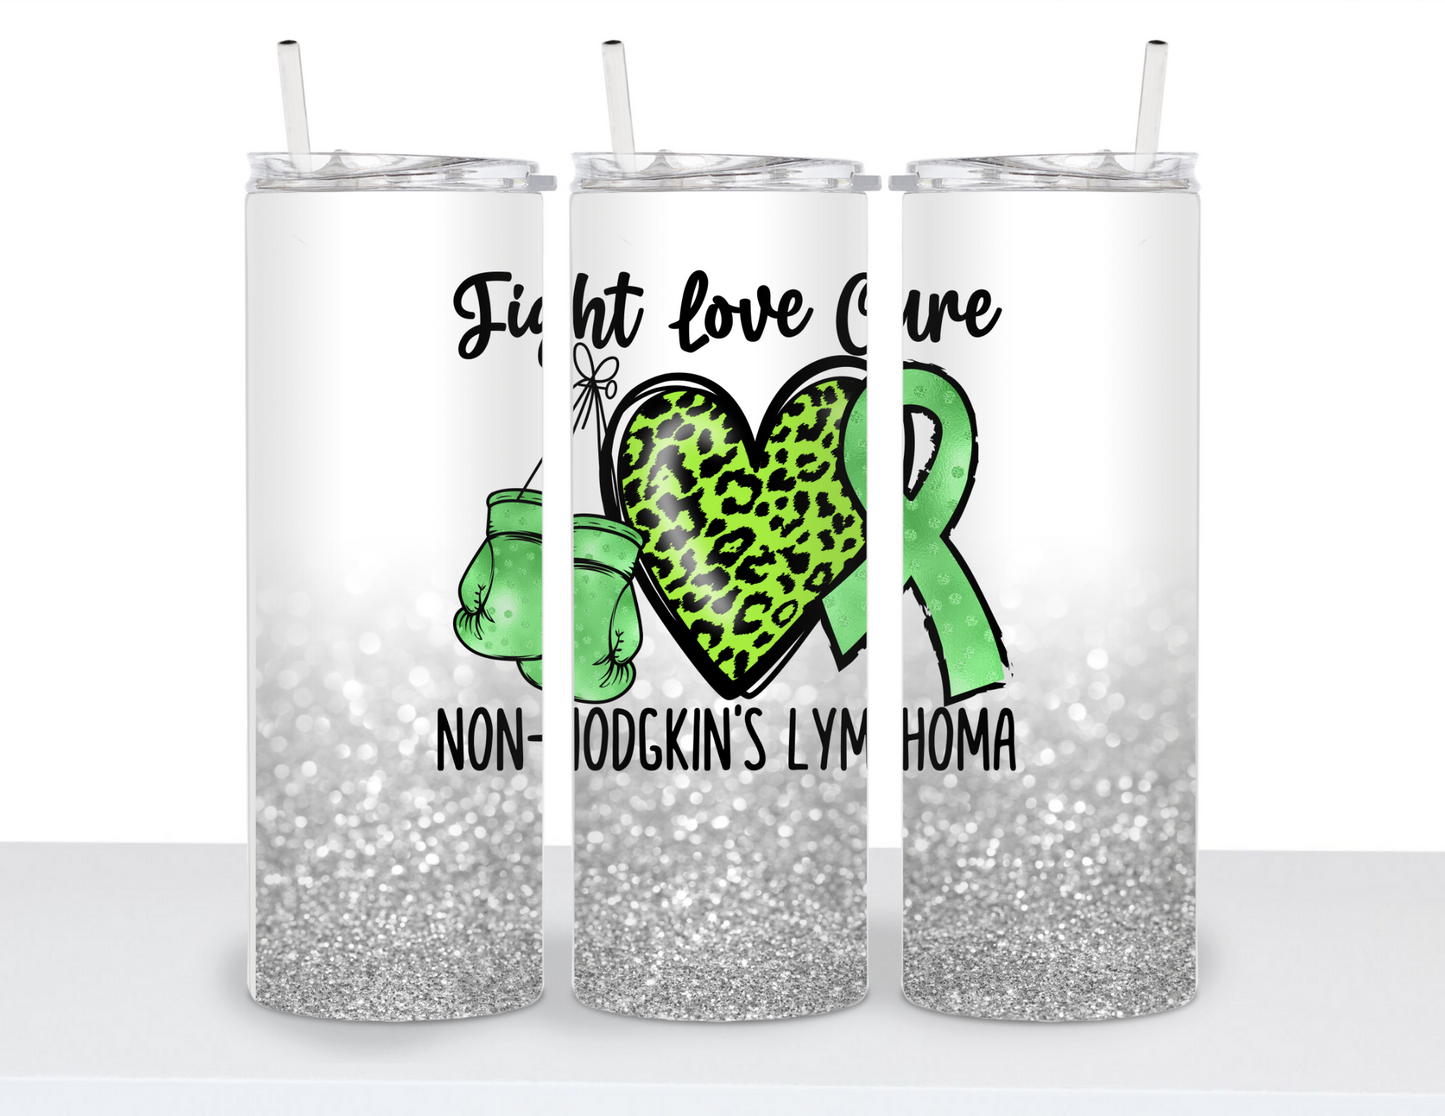 Stainless Steel 20oz Tumbler Straight- Peace, Love Cure: Awareness Collections